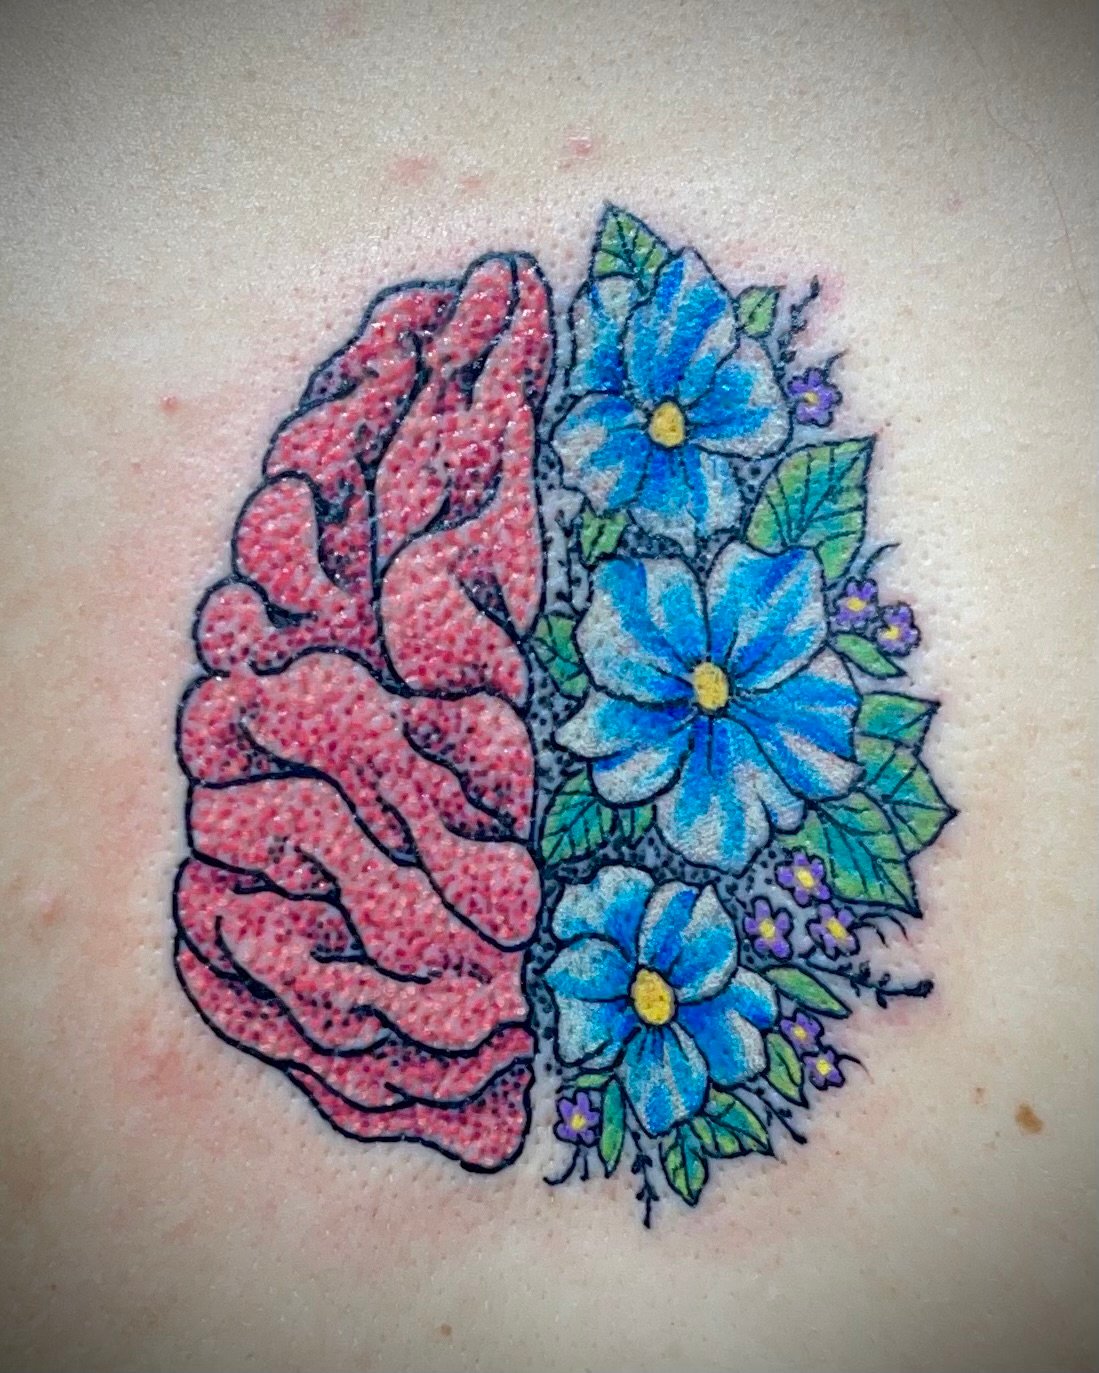 Tattoos For Women - Brain and Flowers